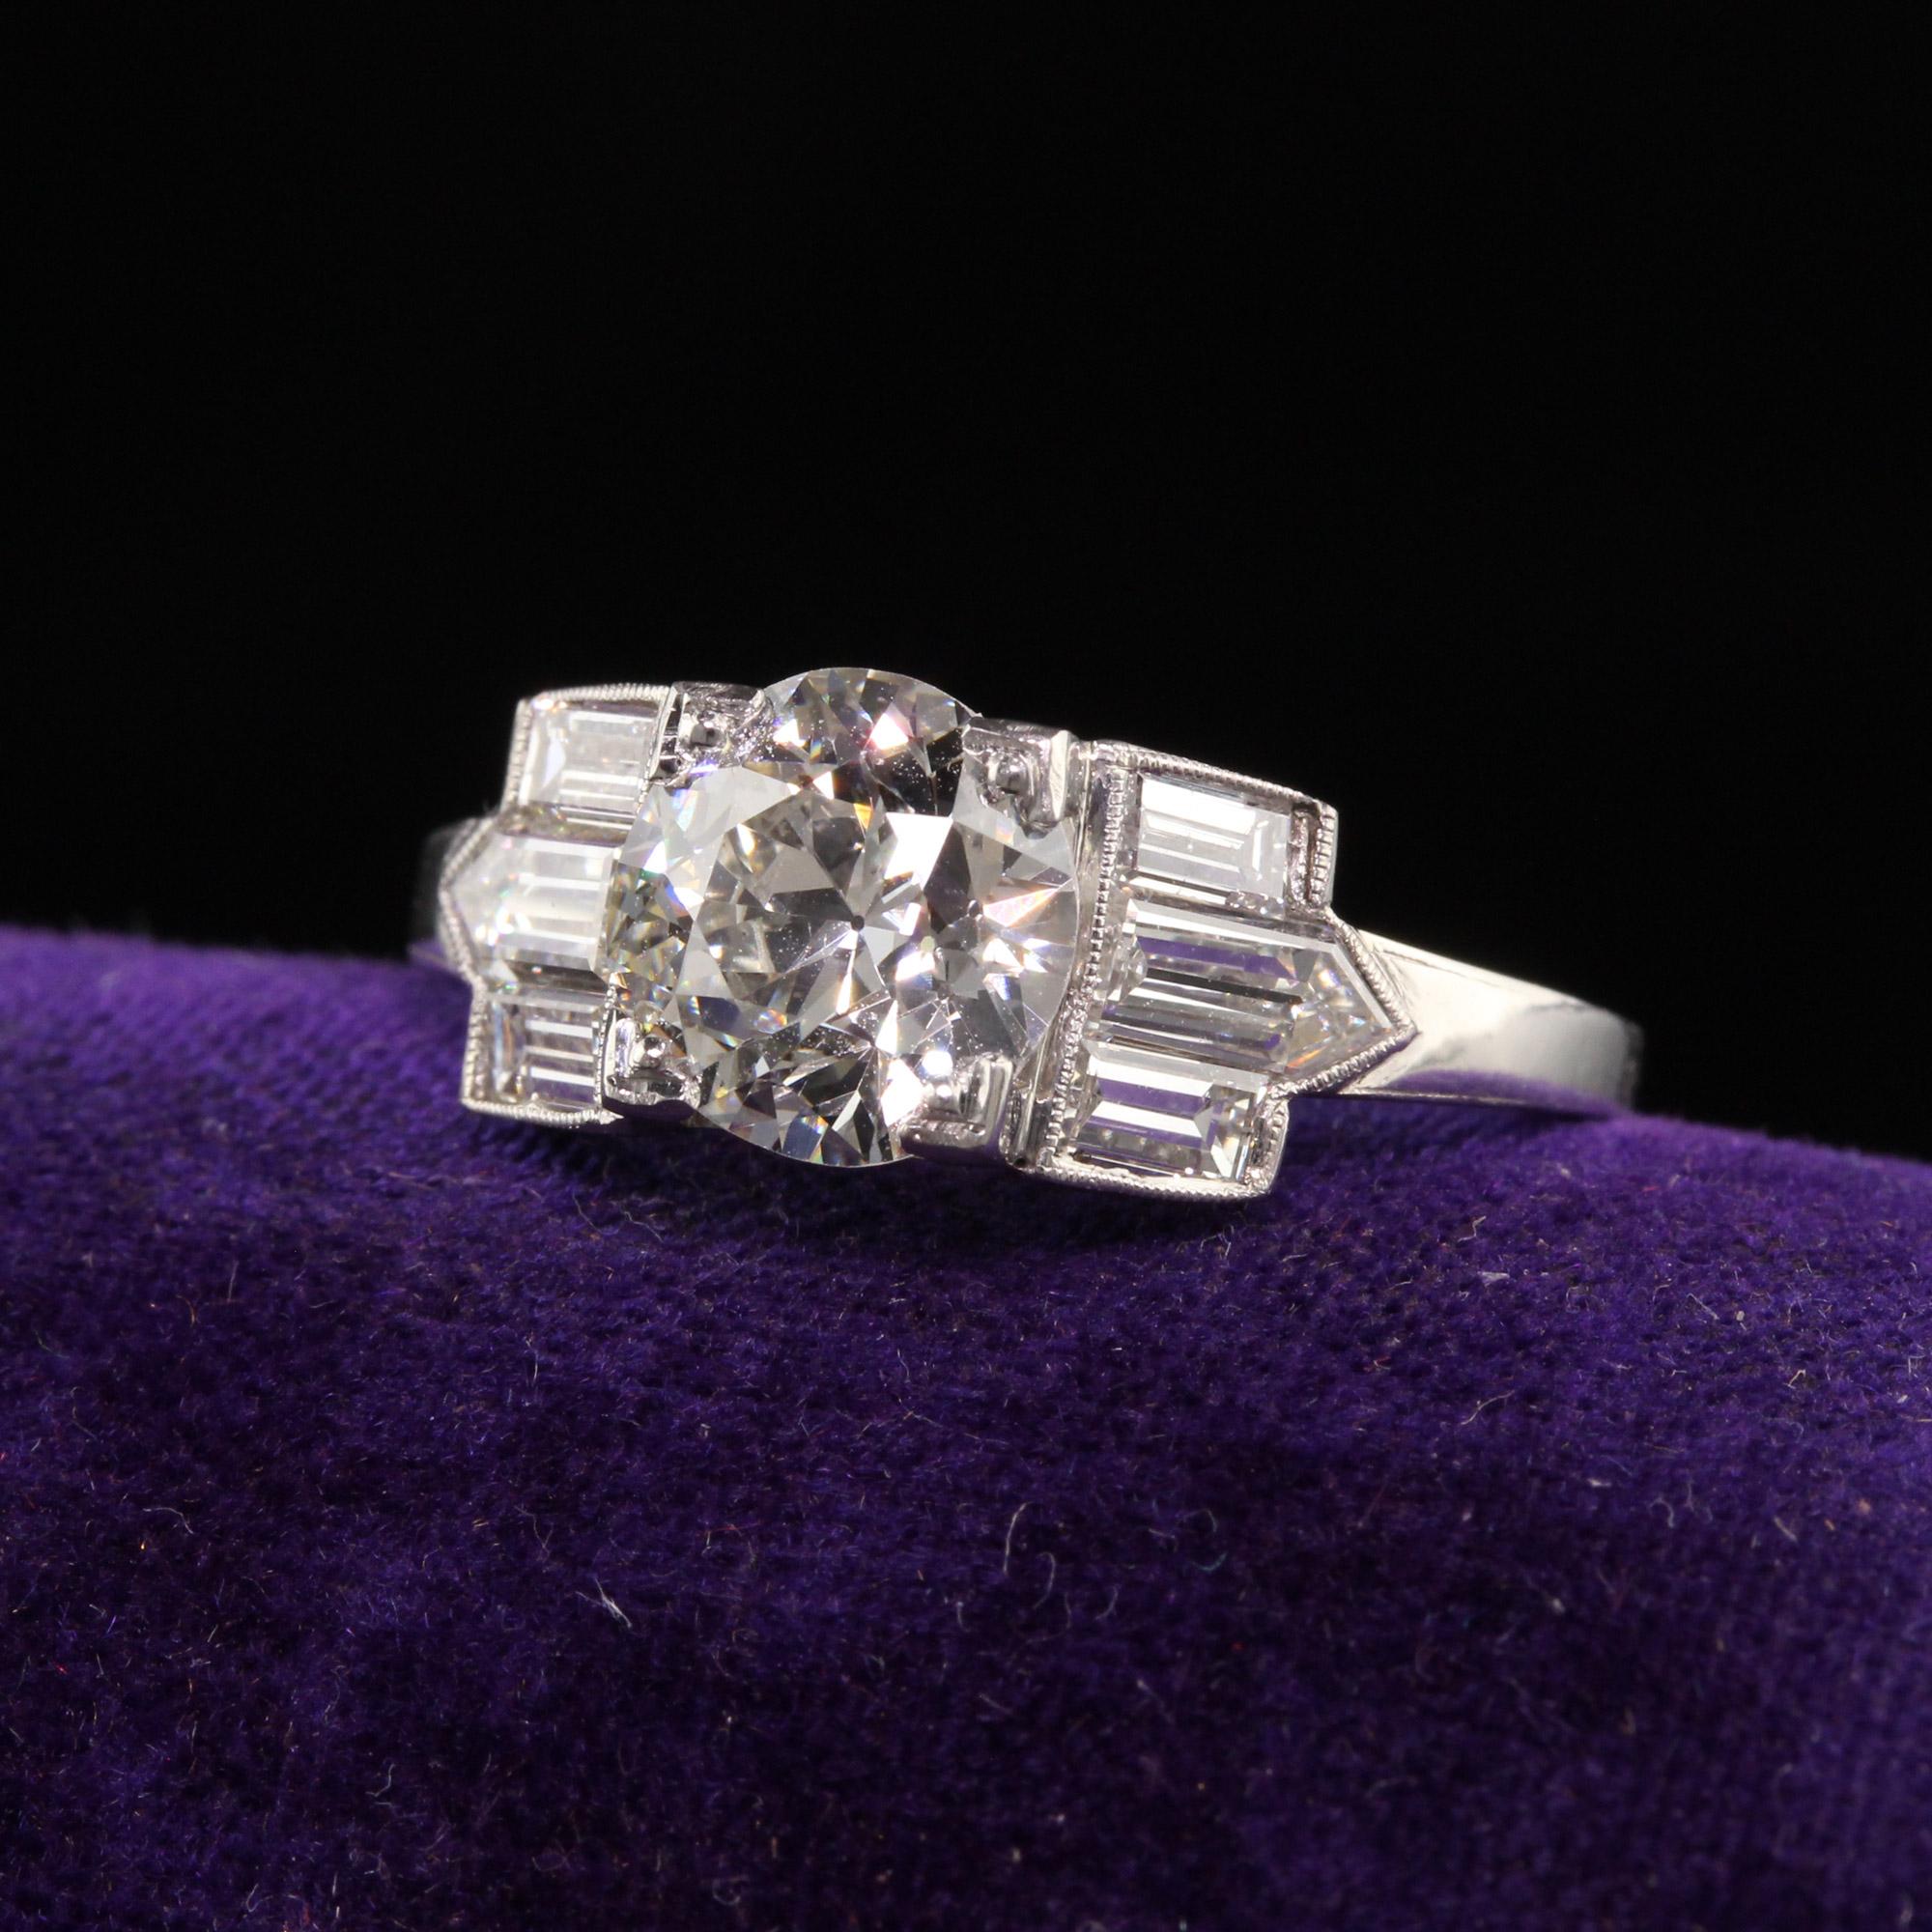 Beautiful Antique Art Deco Platinum Old European Diamond Baguette Engagement Ring - GIA. This incredible engagement ring is crafted in platinum. The center holds a beautiful old european cut stone and is set in a gorgeous Art Deco mounting with